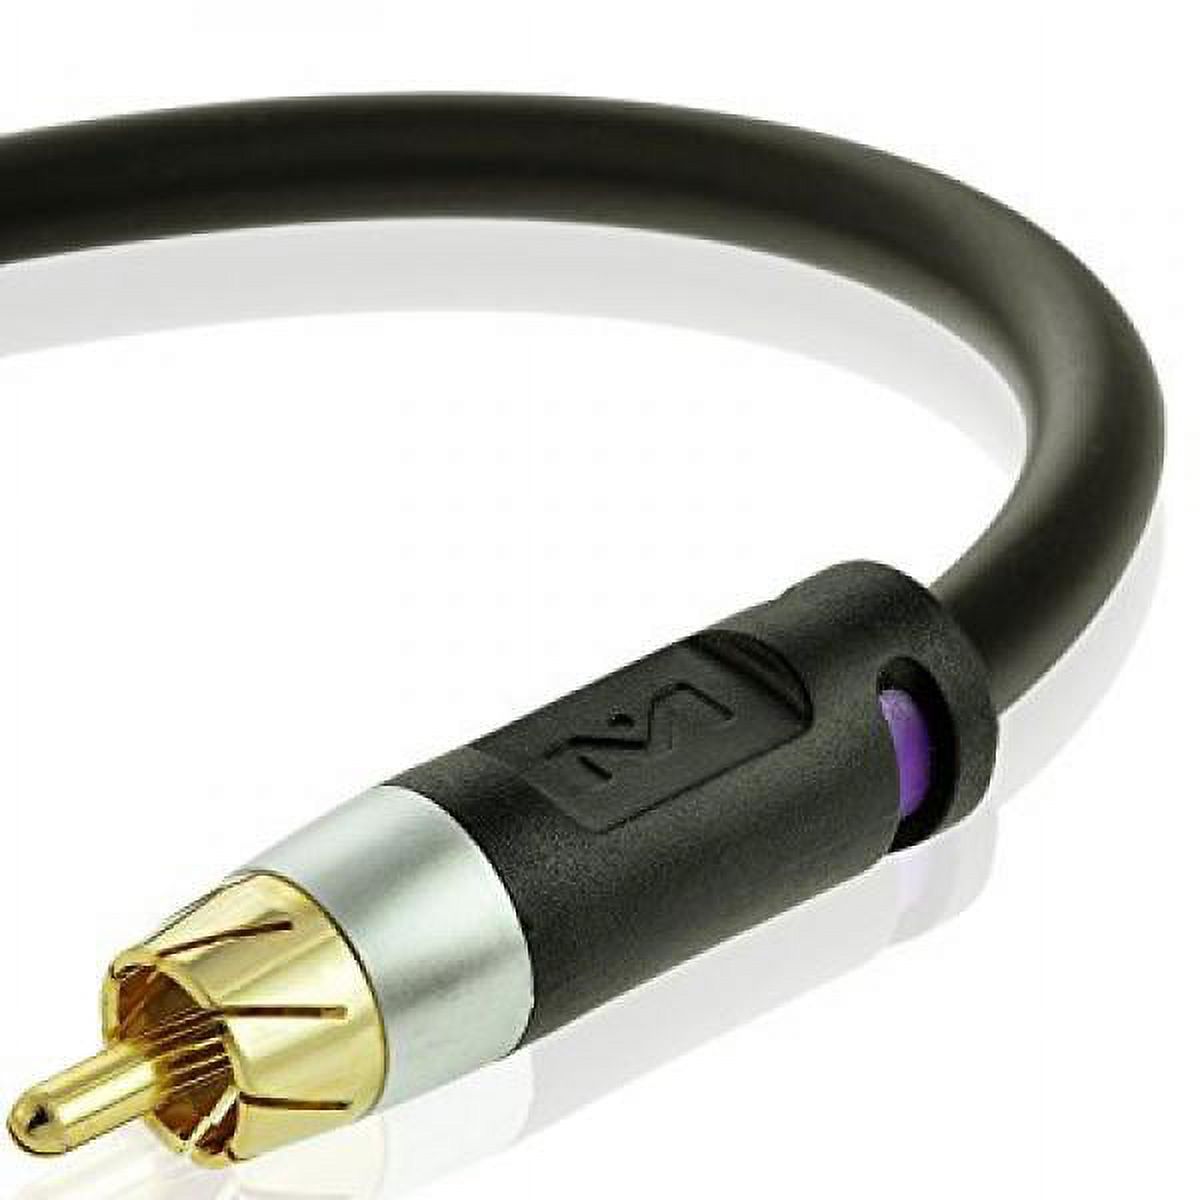 Mediabridge ULTRA Series Subwoofer Cable (75 Feet) - Dual Shielded with Gold Plated RCA to RCA Connectors - Black - (Part# CJ75-6BR-G1 ) - image 1 of 6